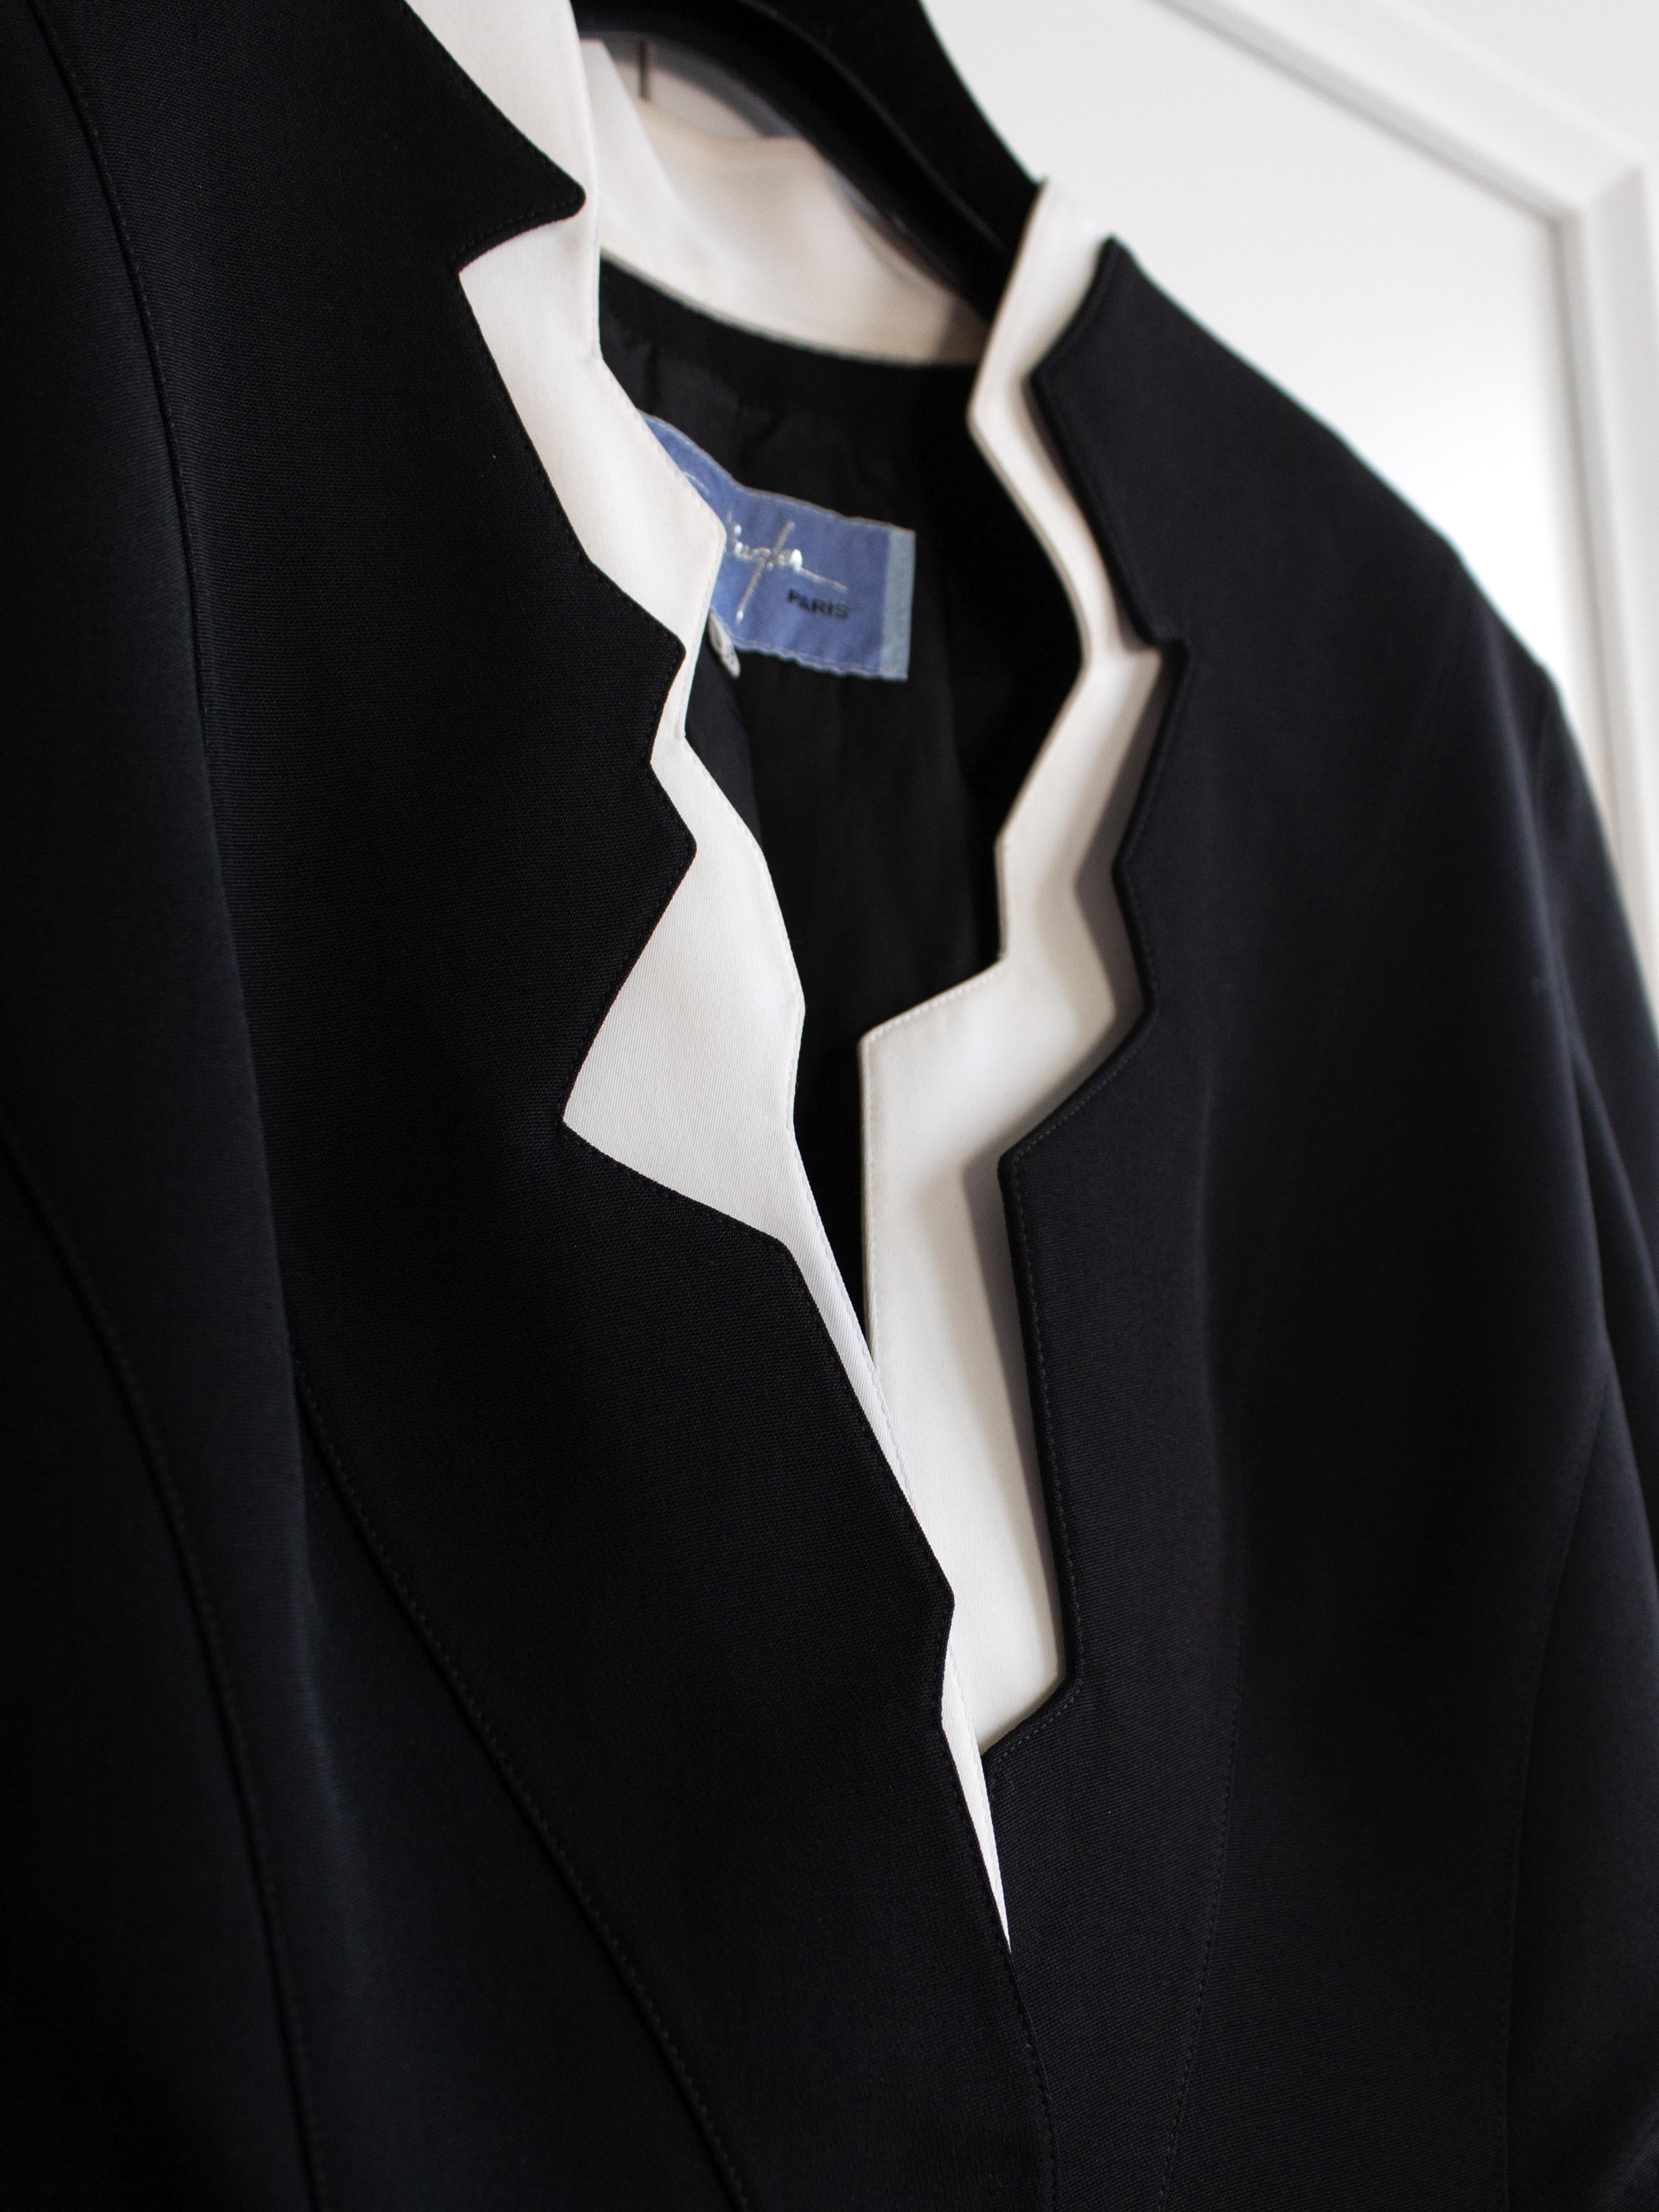 Iconic Thierry Mugler Vintage S/S 1994 Black White Zigzag Sculptural Jacket For Sale 5